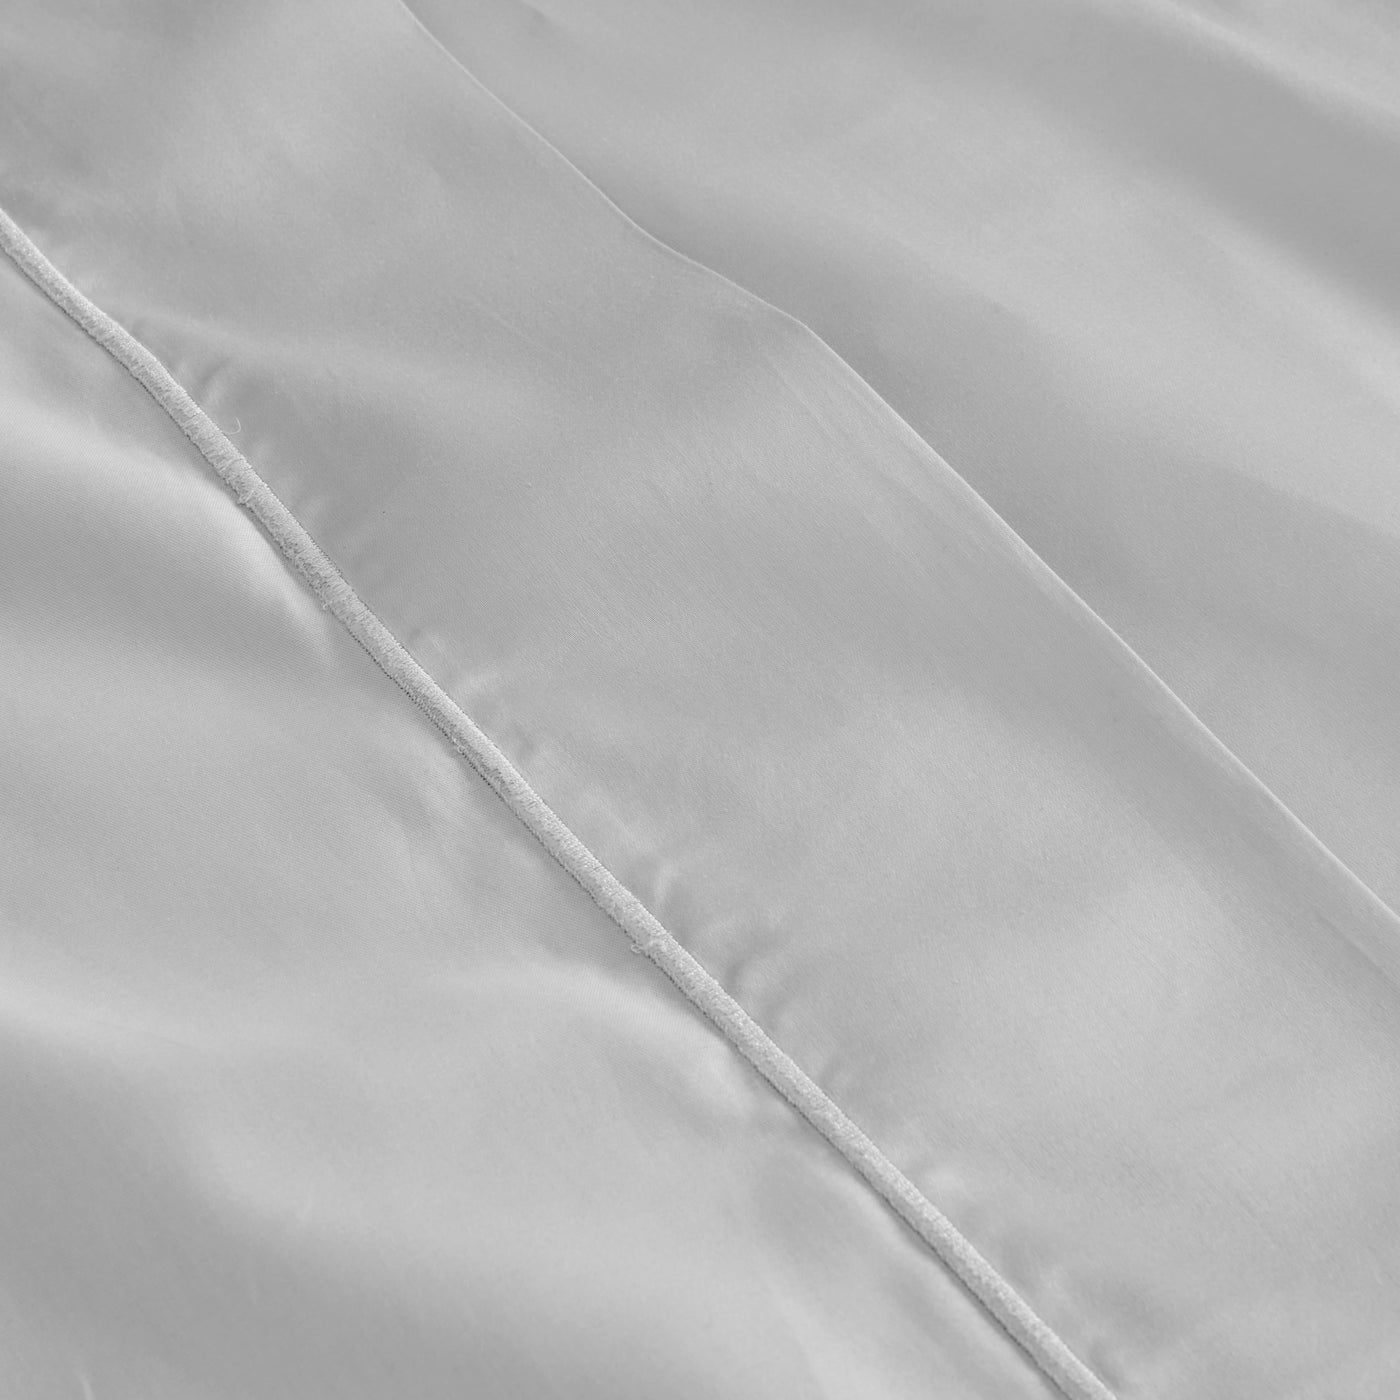 100% Egyptian Cotton Sheet Set - 400 Thread Count - Bedding Sheets & Pillowcase - Deep Pocket Fits up to 15-18" Mattress - Silver Gray - Certified Egyptian Cotton - Nile Delta collection